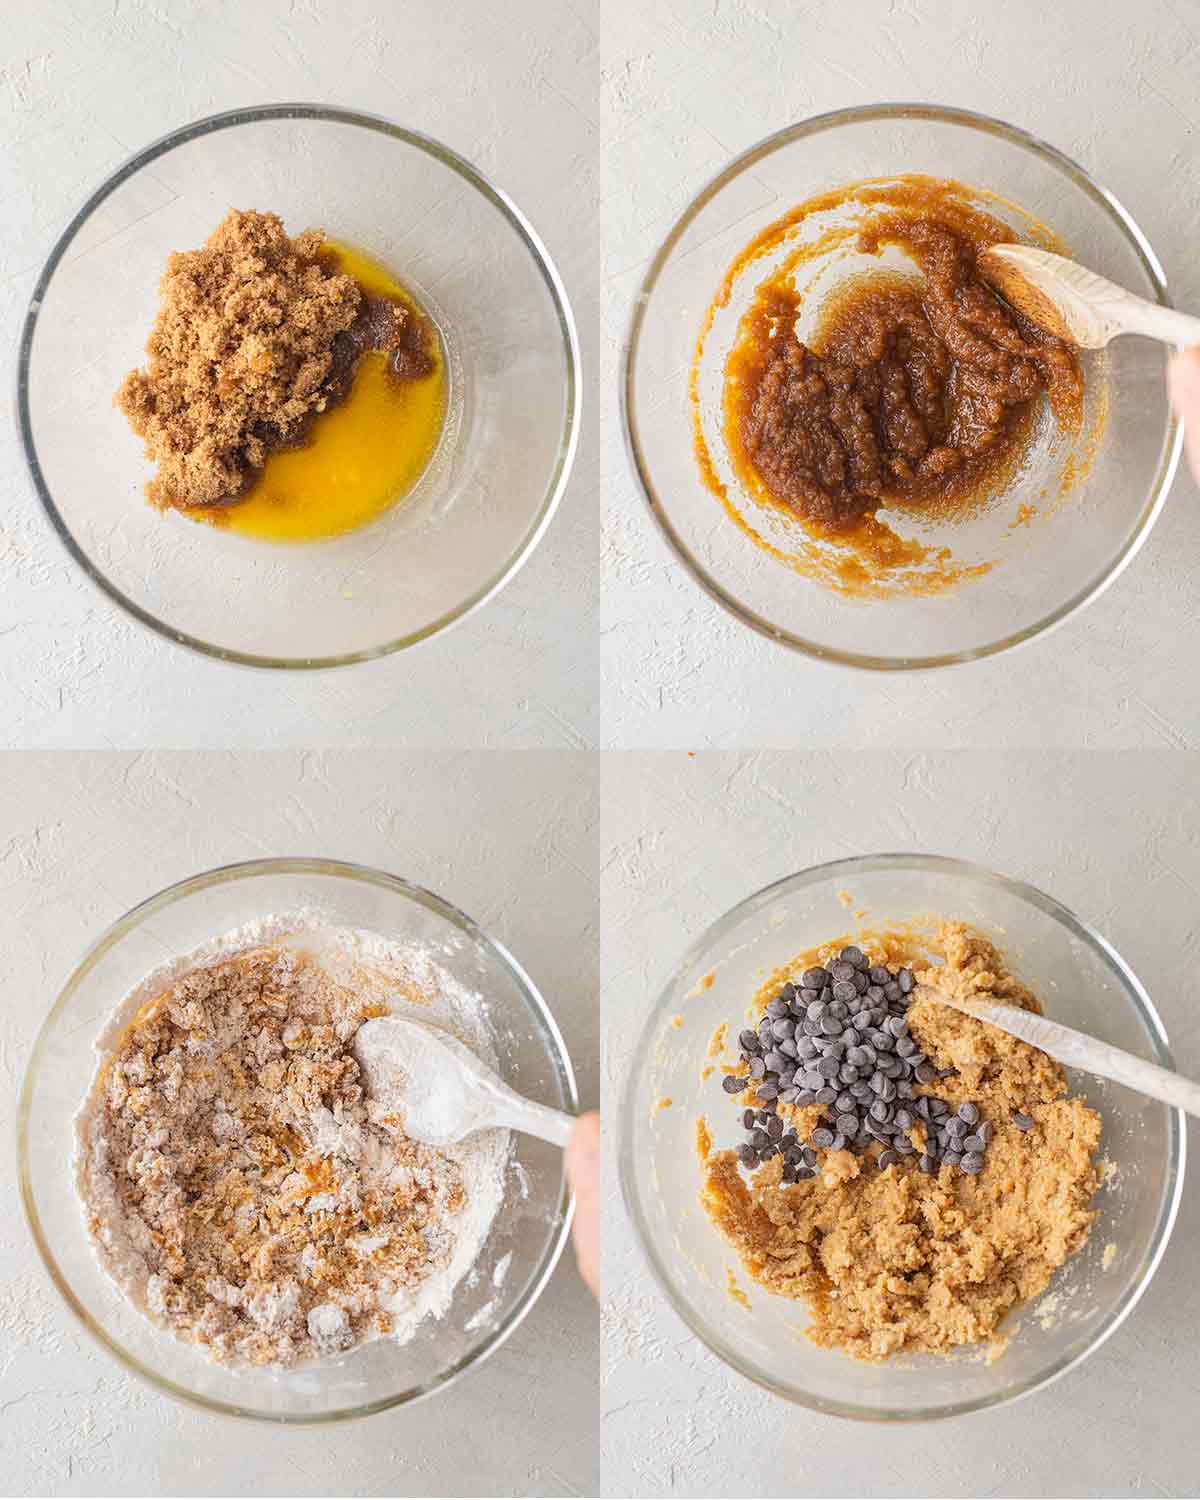 Four image collage showing how to make vegan chocolate chip cookie dough.